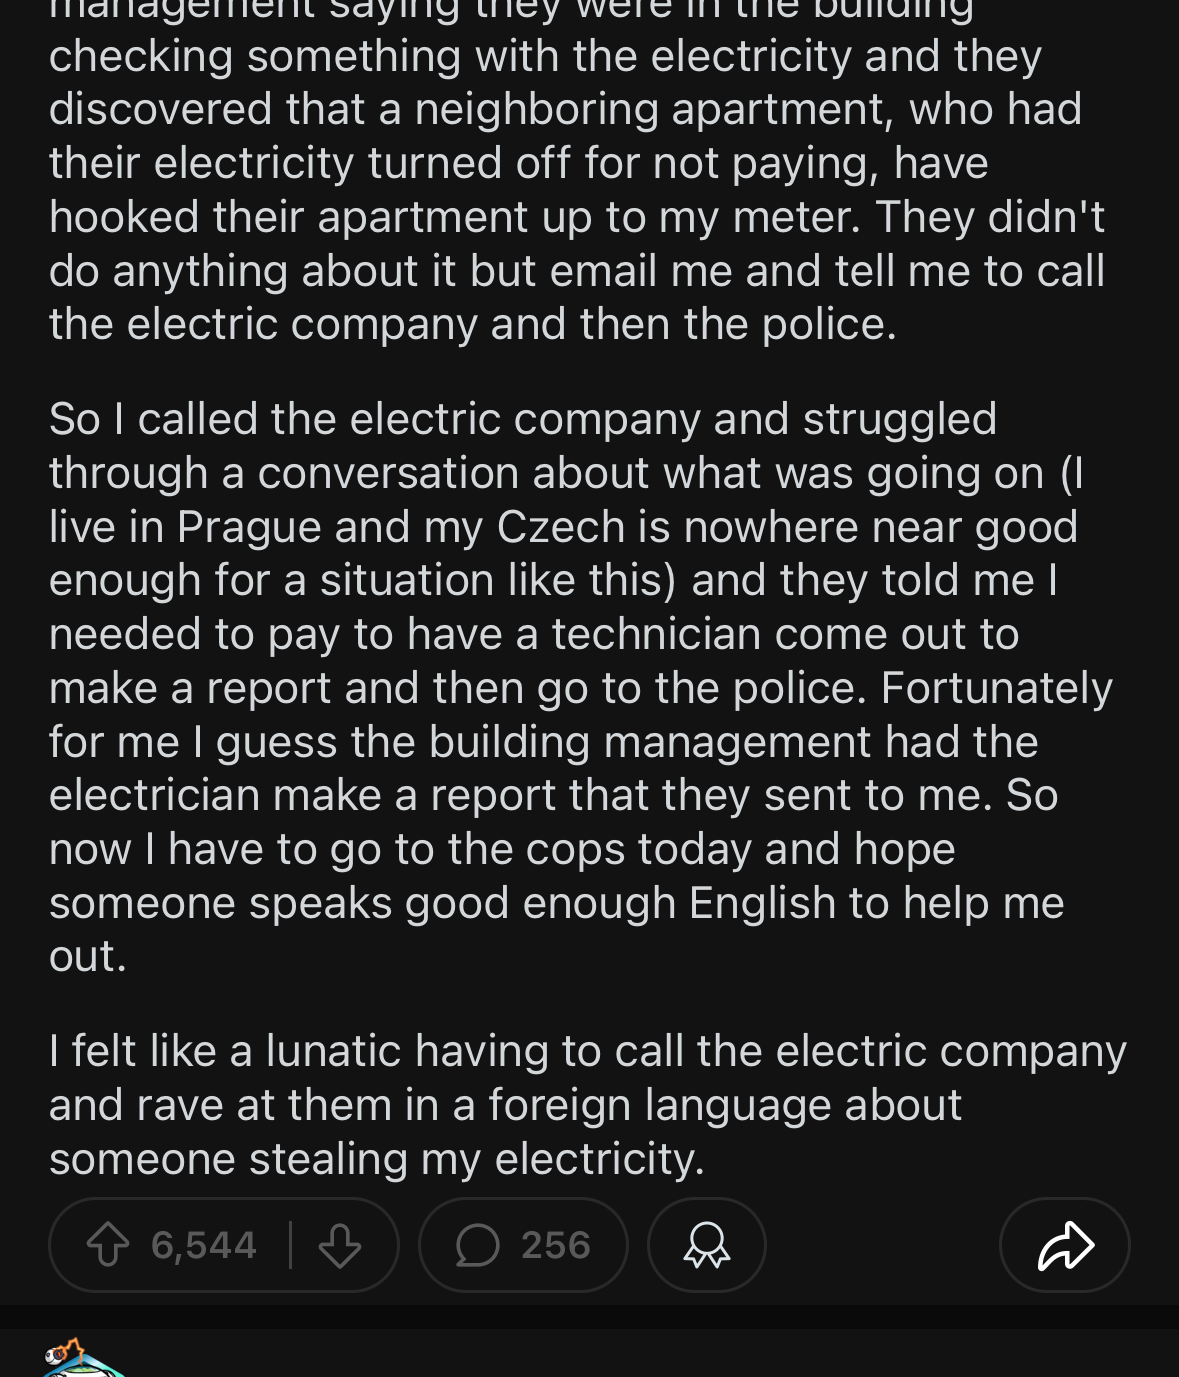 Reddit post titled &quot;My neighbors are stealing my electricity&quot; describes a situation where the poster&#x27;s apartment building was found stealing electricity. The comments include someone offering help in Czech and another expressing appreciation